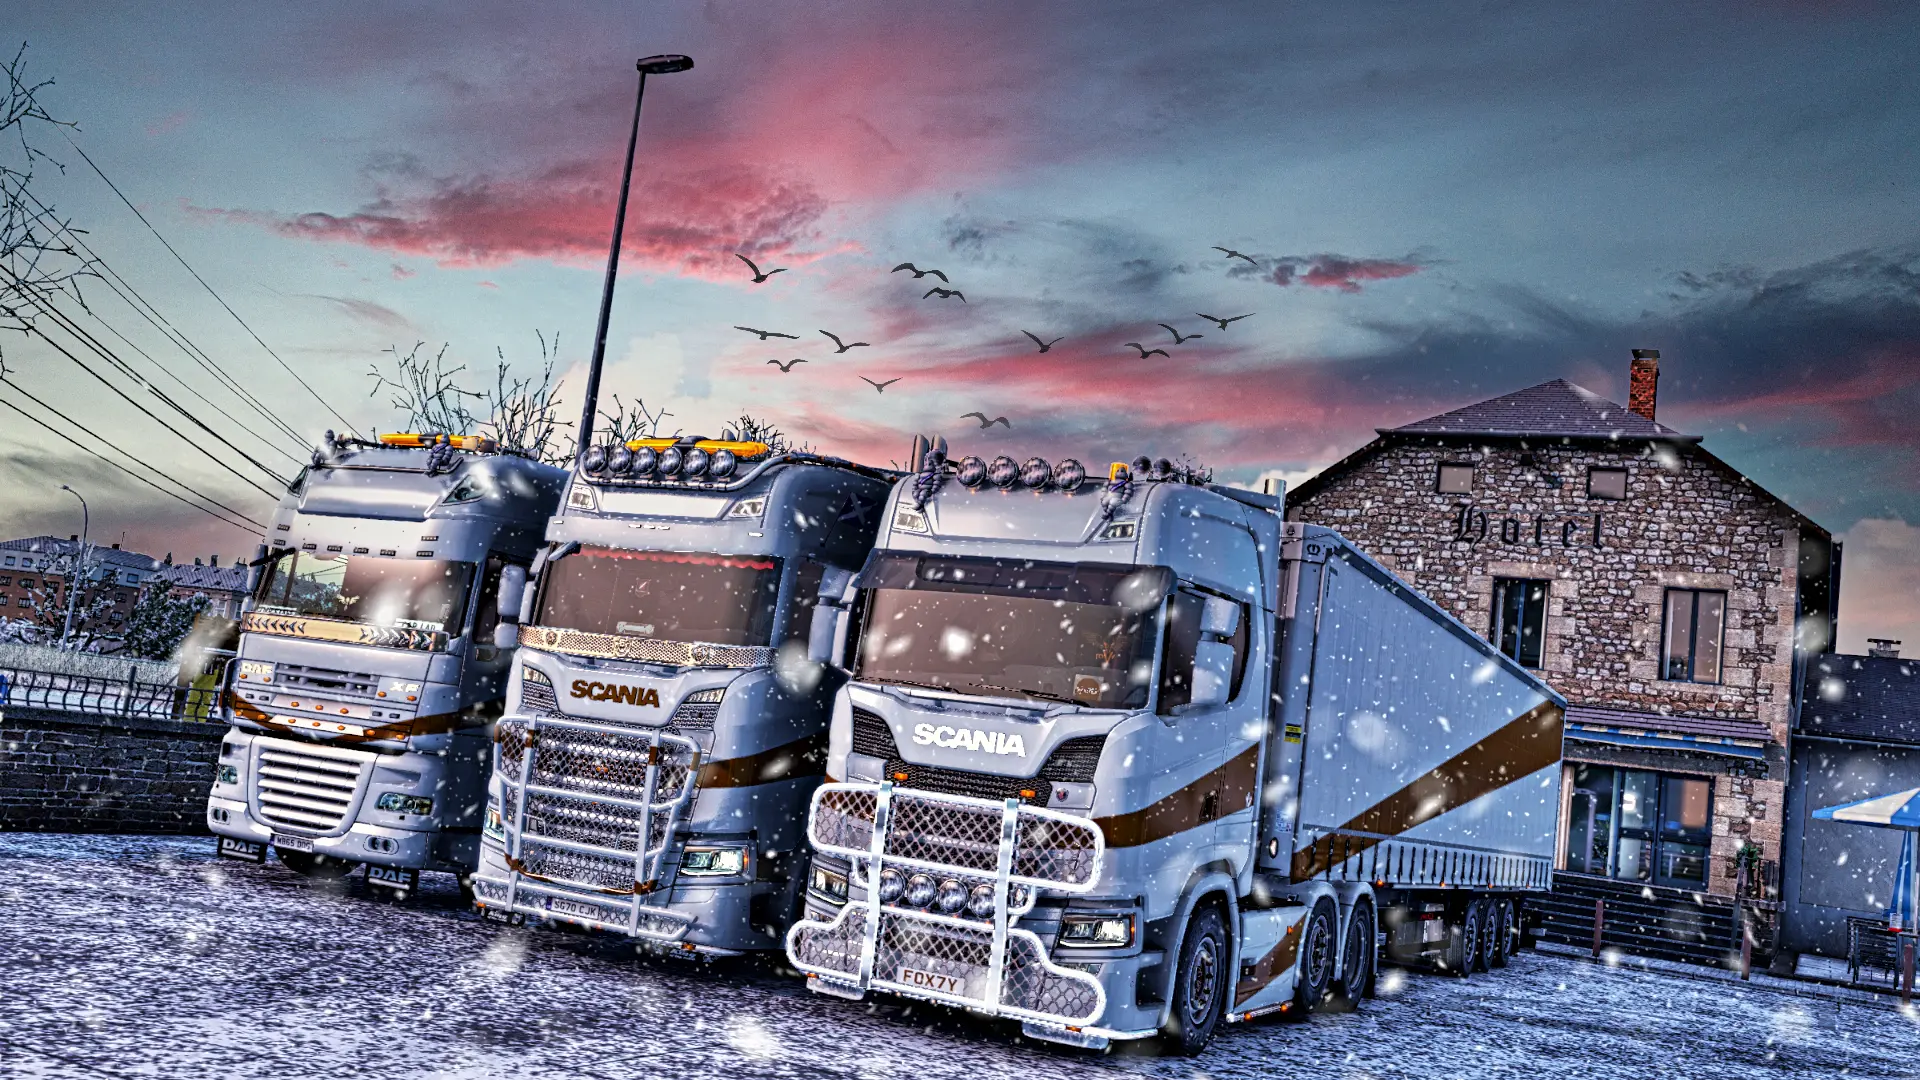 Three GPE trucks parked in a hotel, all wearing the new gold and white paint job. Birds are flying over the trucks and the sky is blue and pink